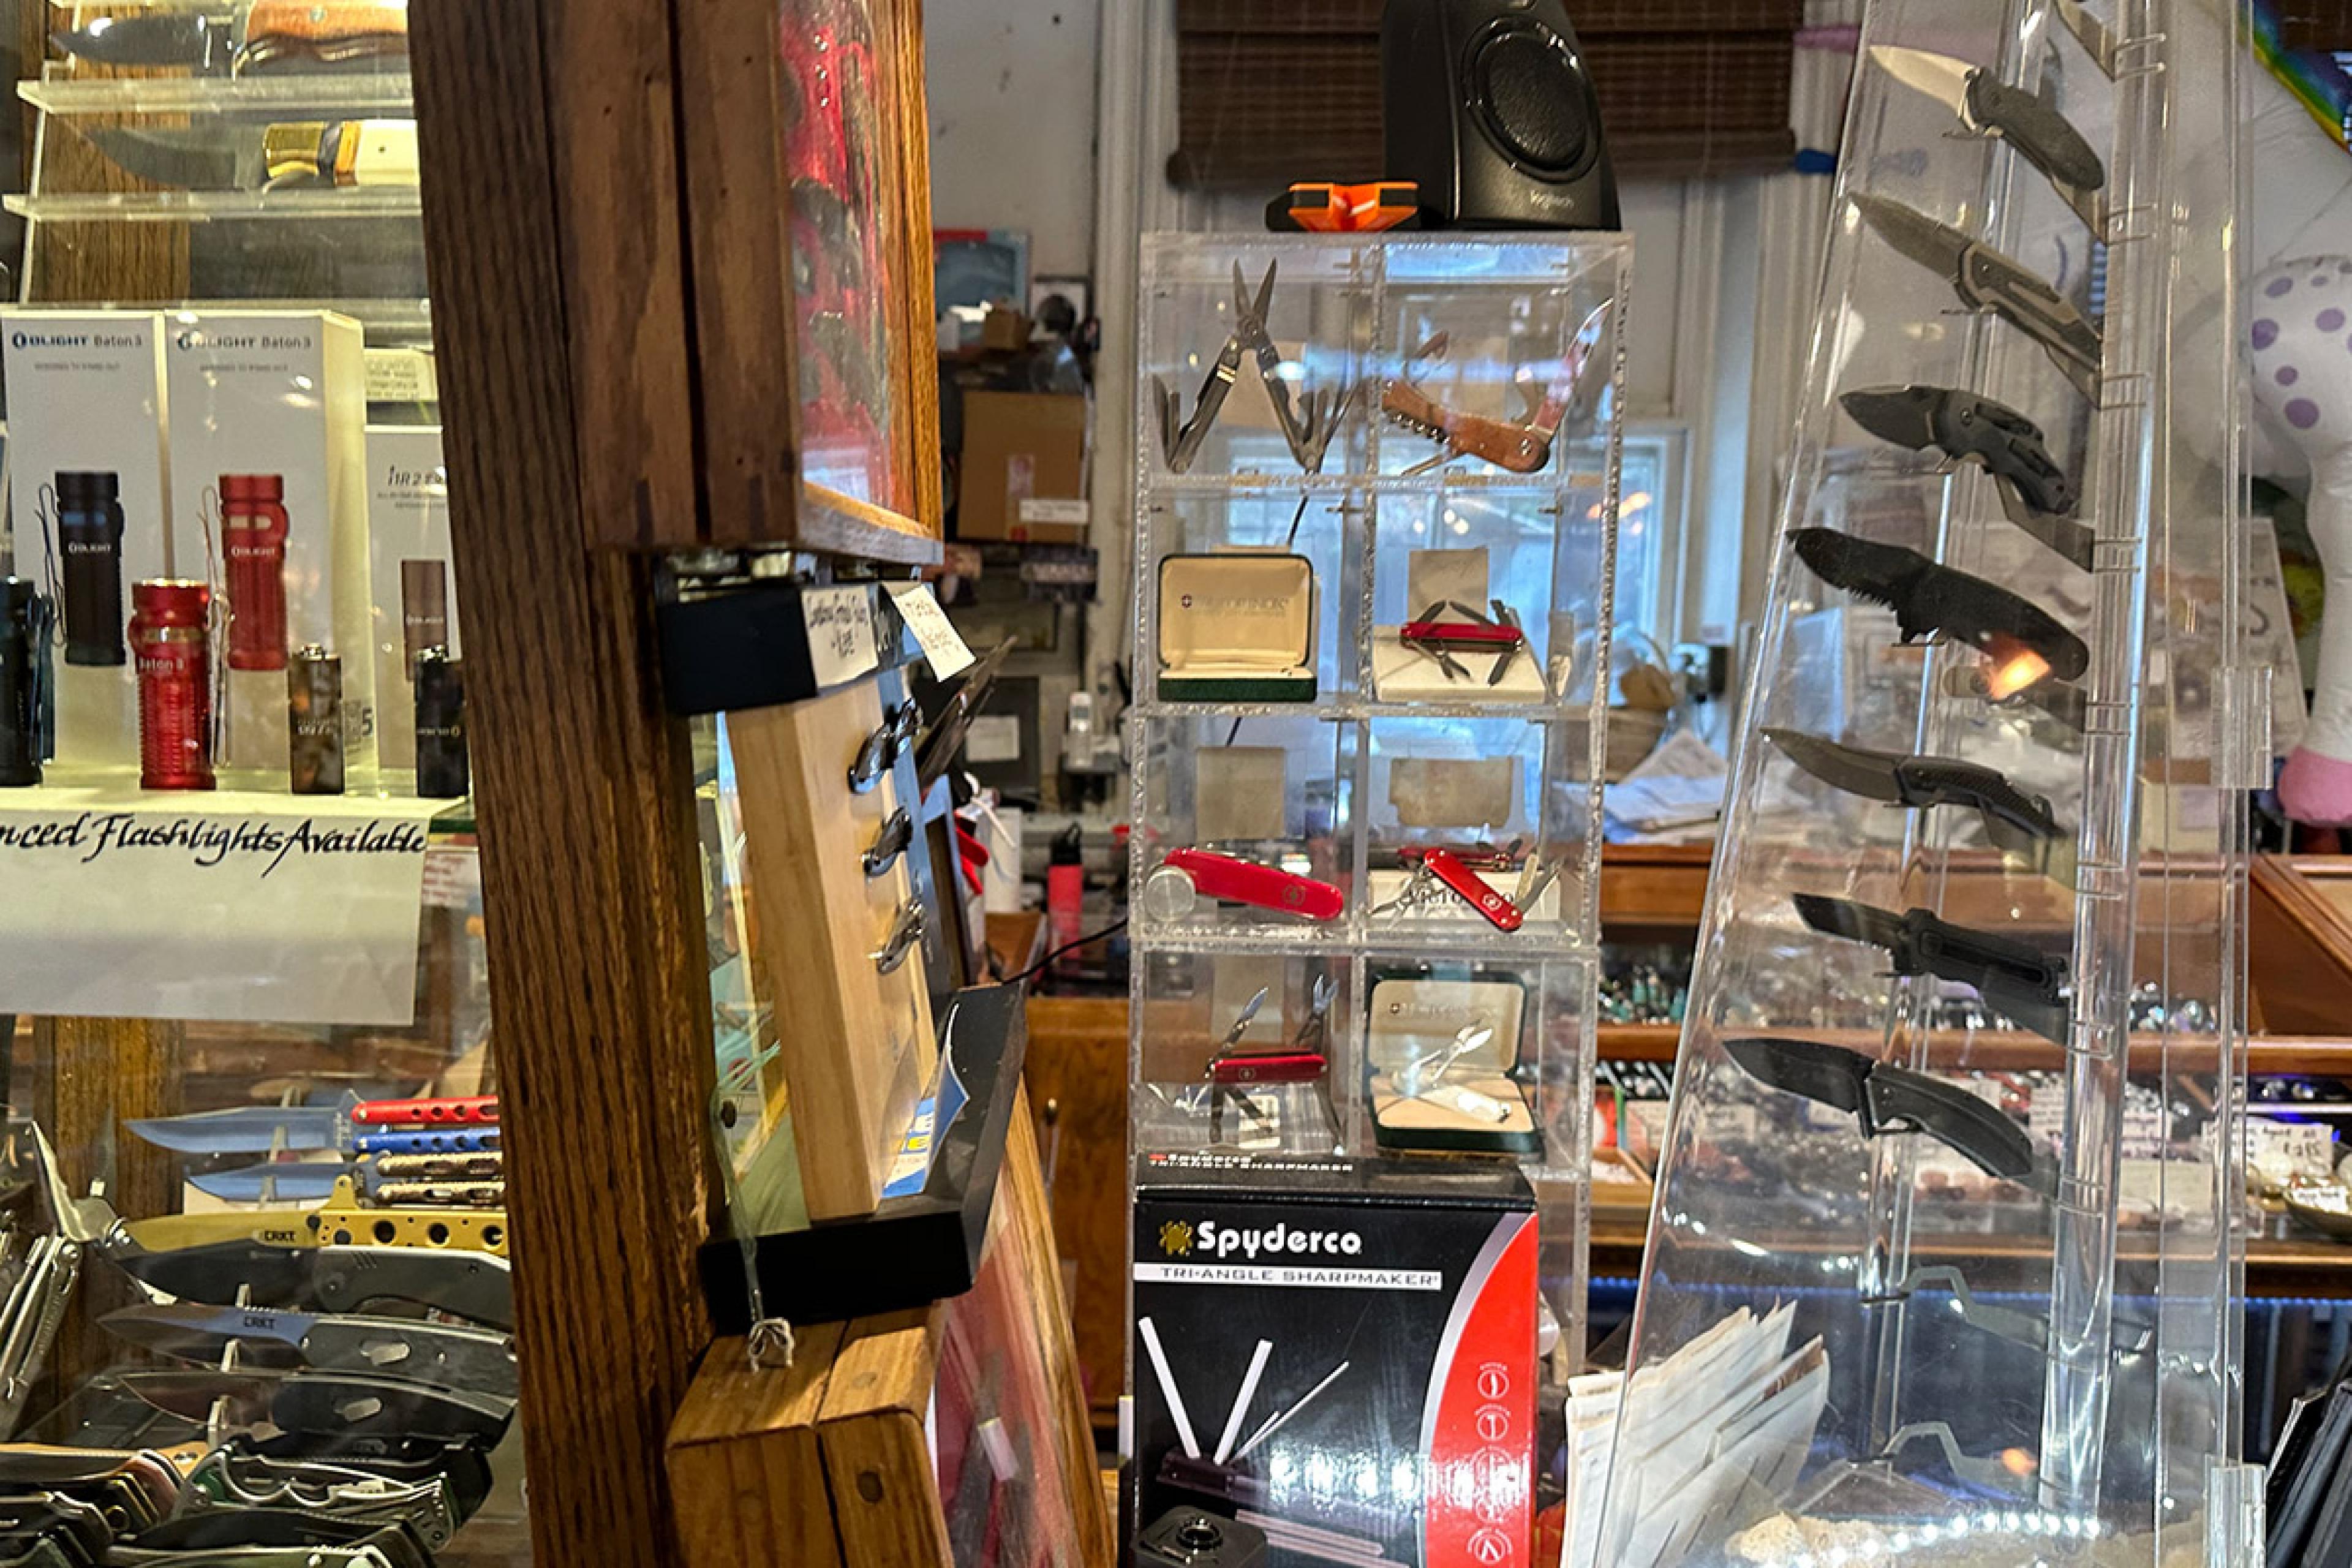 pocket knives and swiss army knives on display in a shop